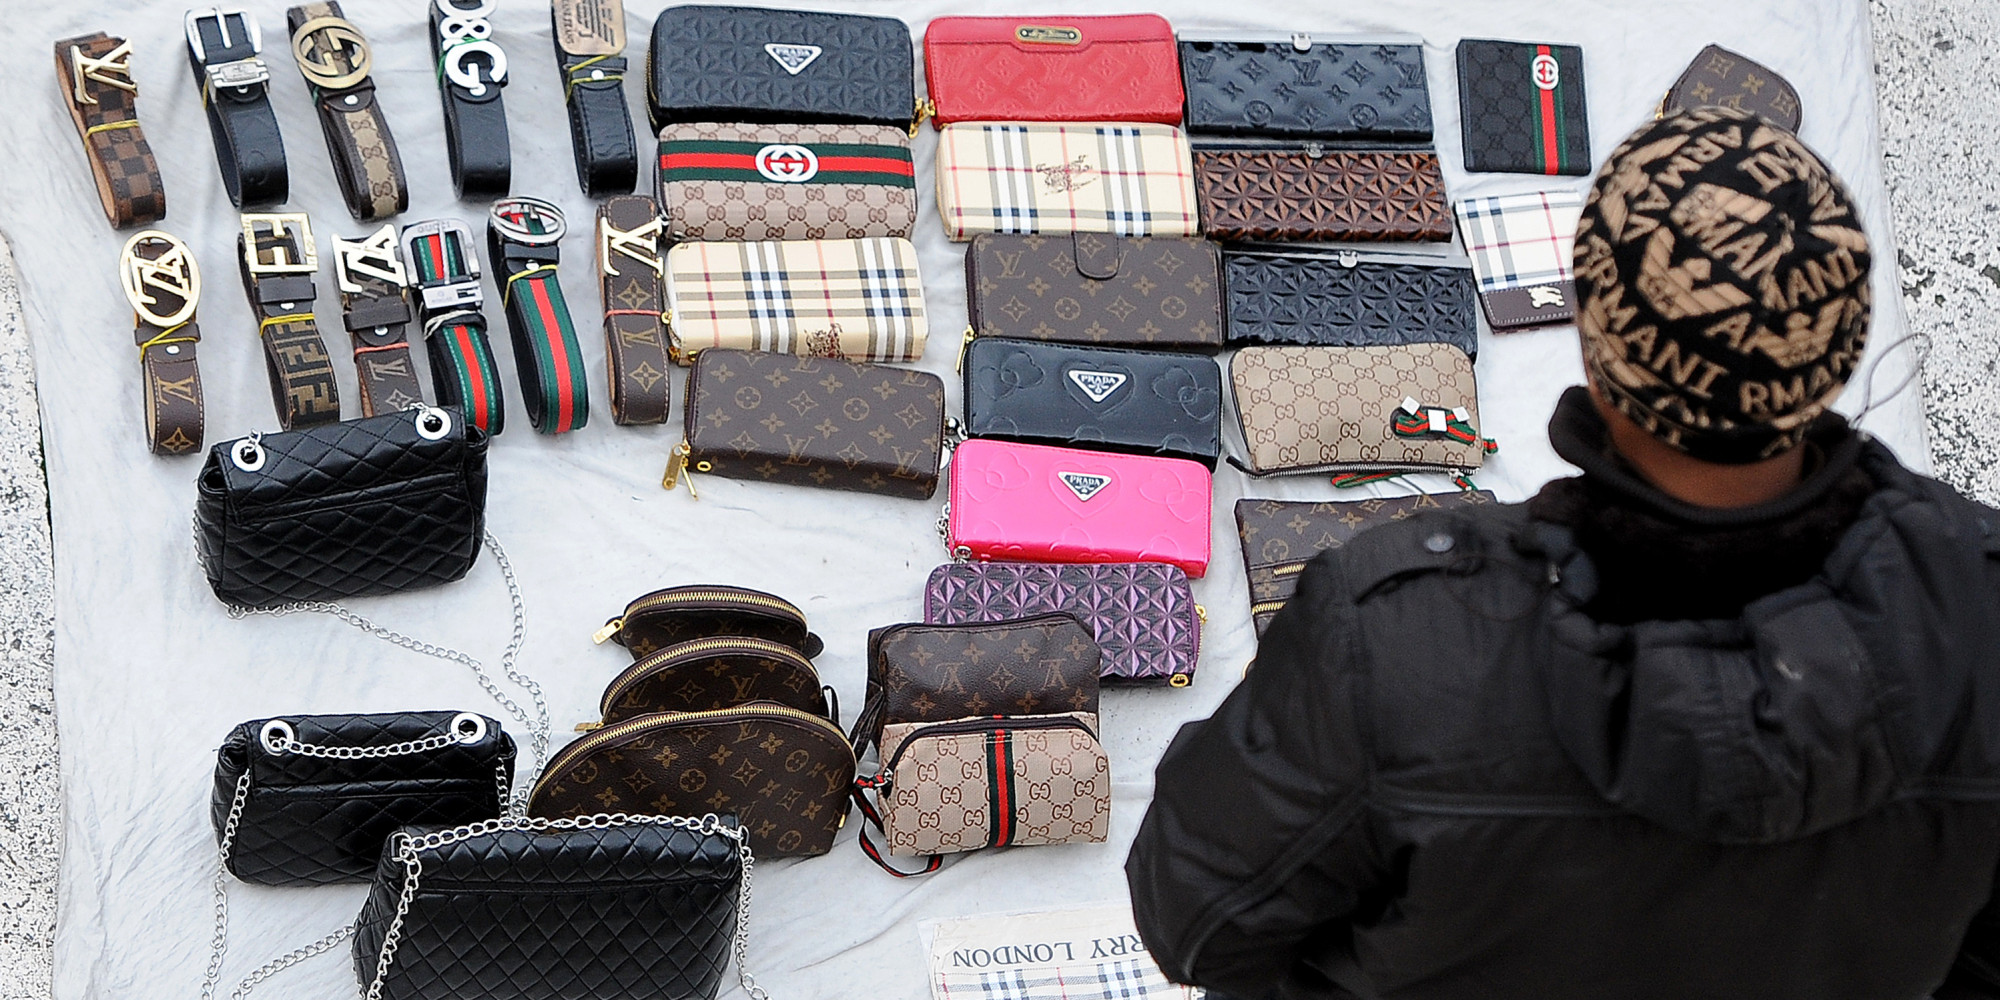 Fake Bags, Clothing Less Popular As Shoppers Find Better Deals On Designer Items: Survey